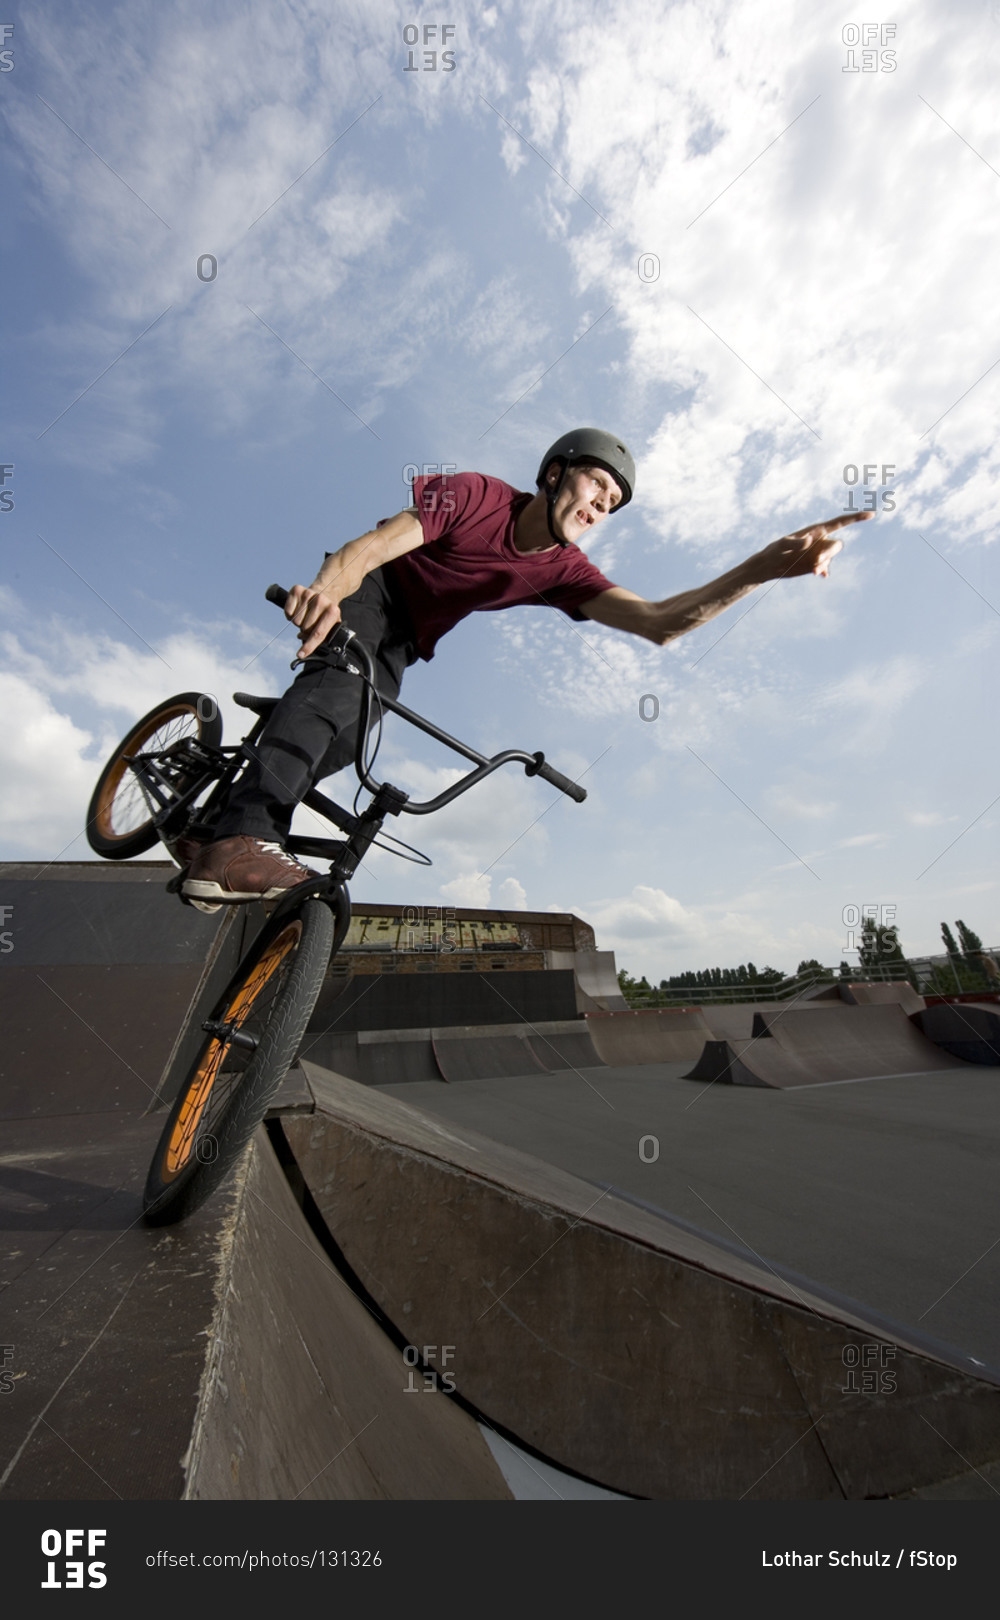 A BMX rider balancing on the edge of a sports ramp